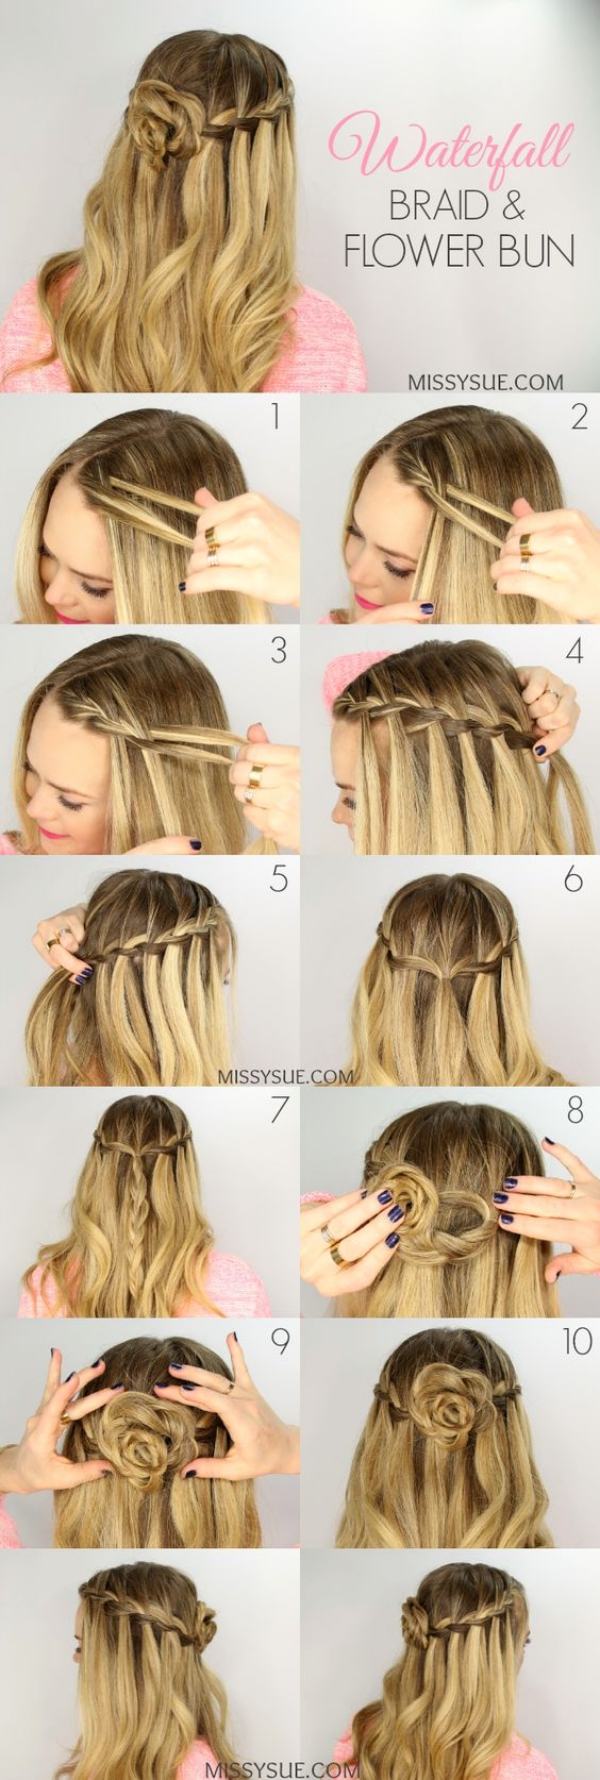 Braid Hairstyles to Try this Summer (With Tutorial)